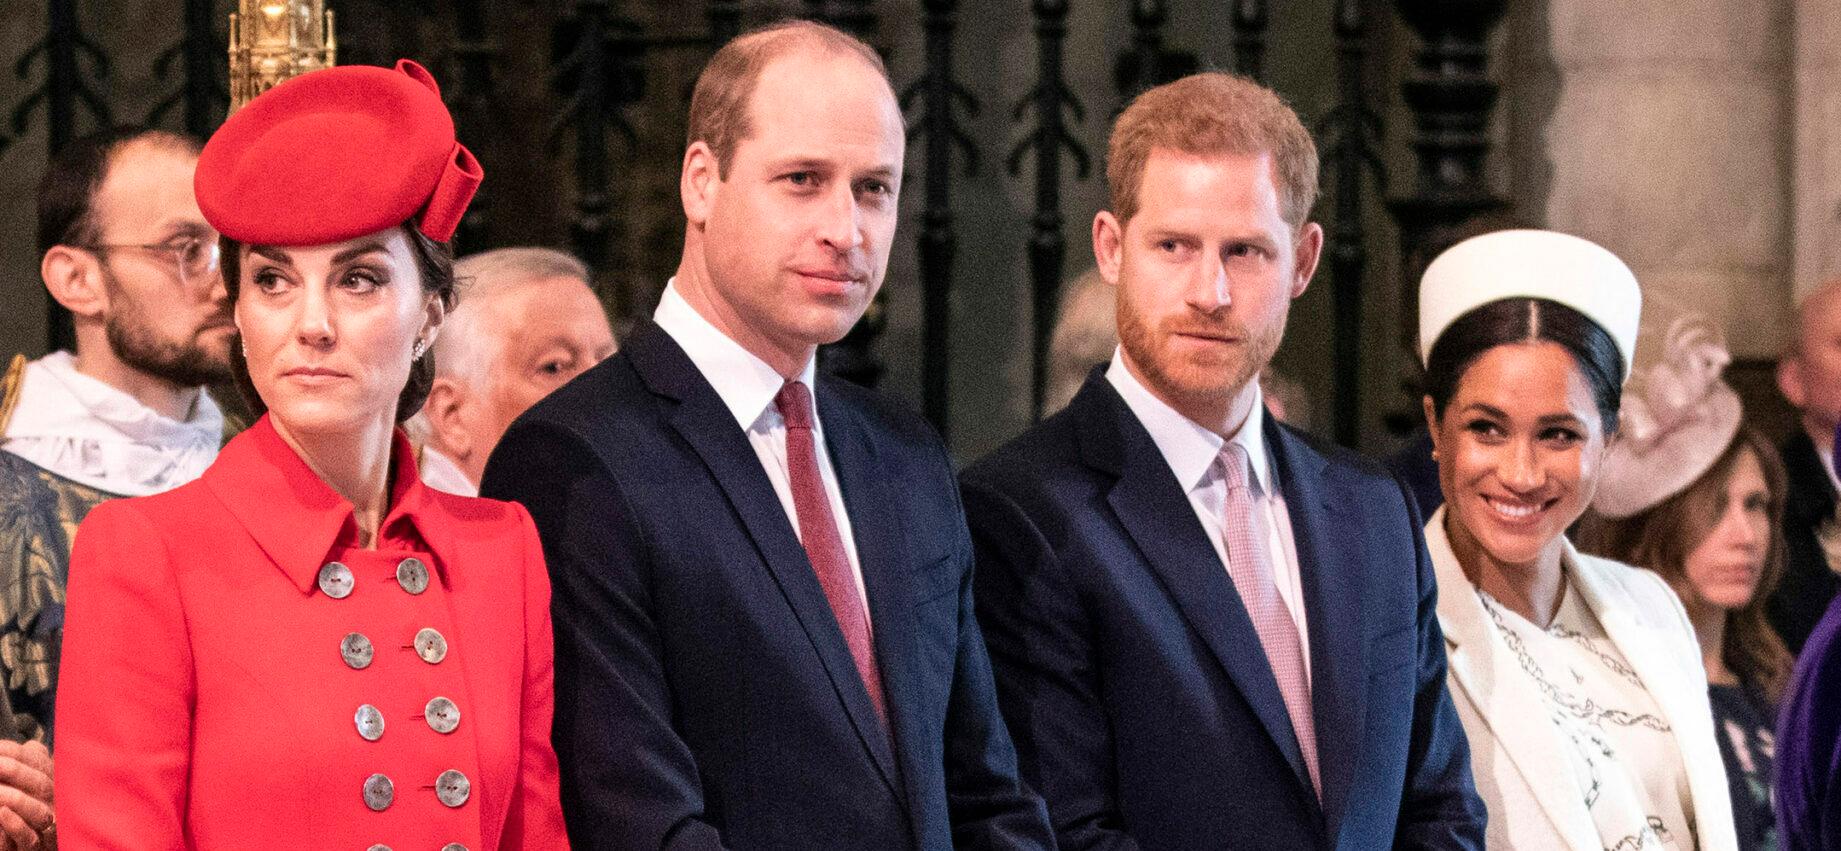 Prince William And Kate Middleton Reportedly Still Reeling From The Bombshells In ‘Harry & Meghan’